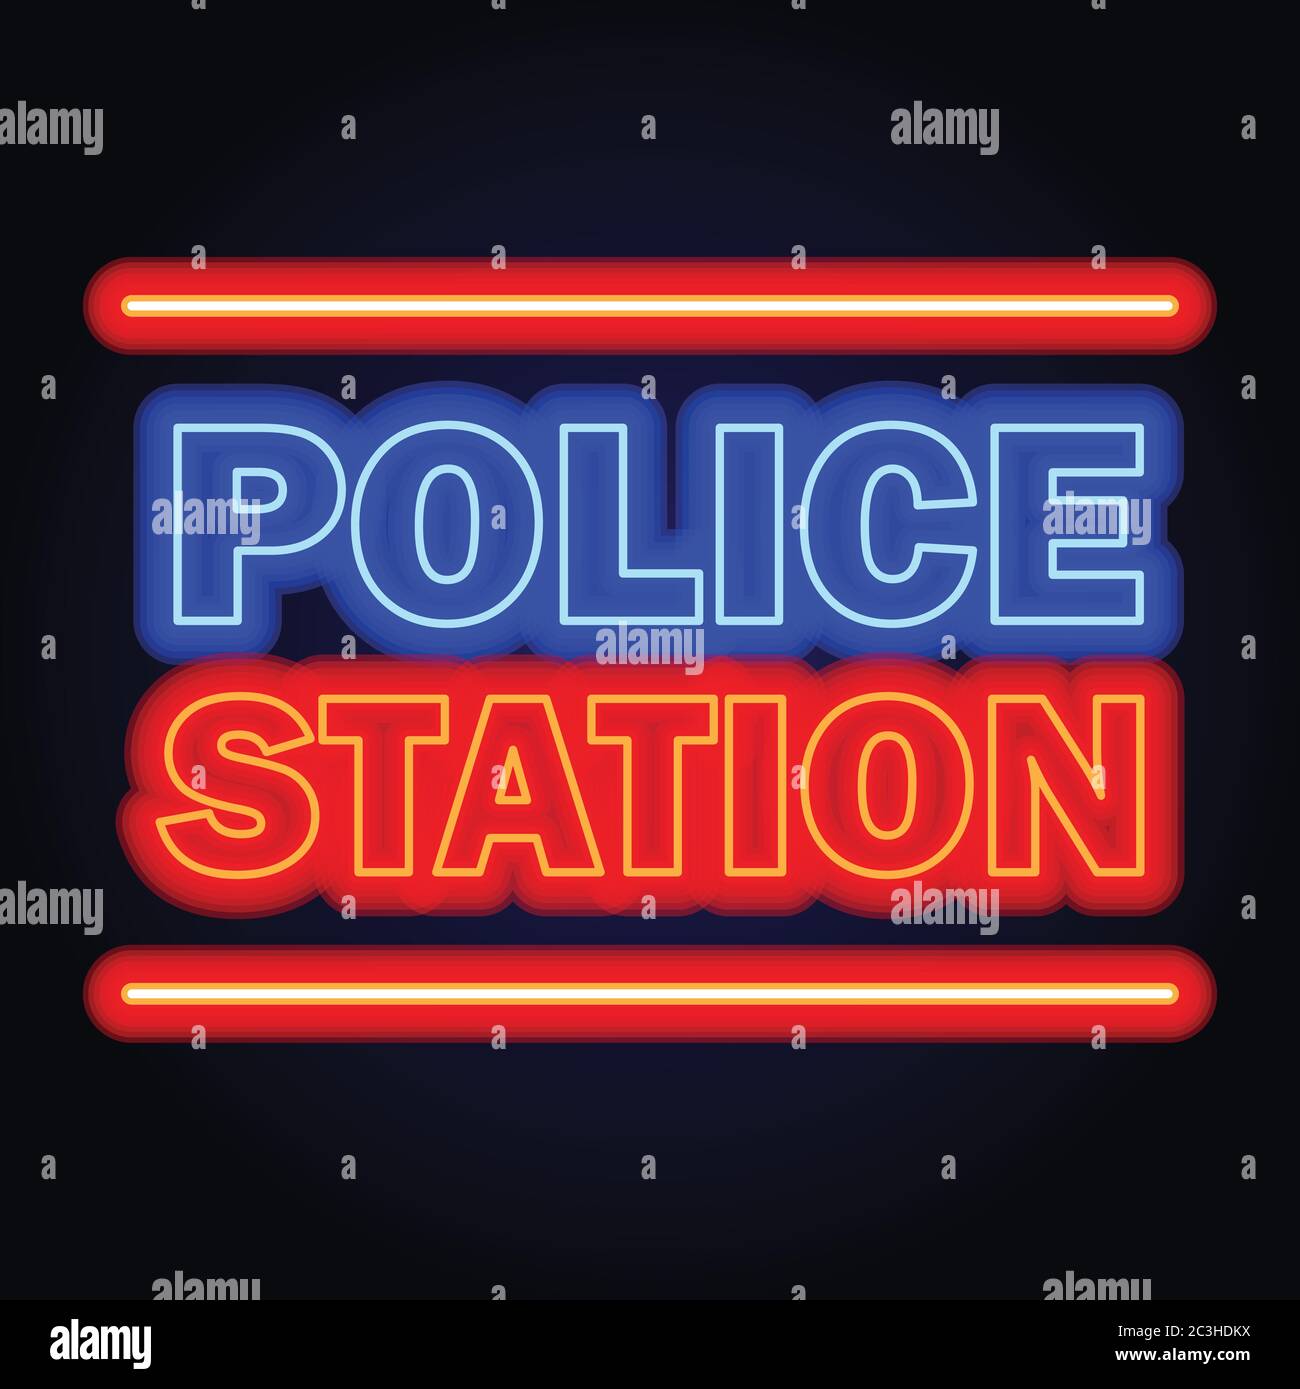 police station neon sign effect for police station office. vector illustration Stock Vector